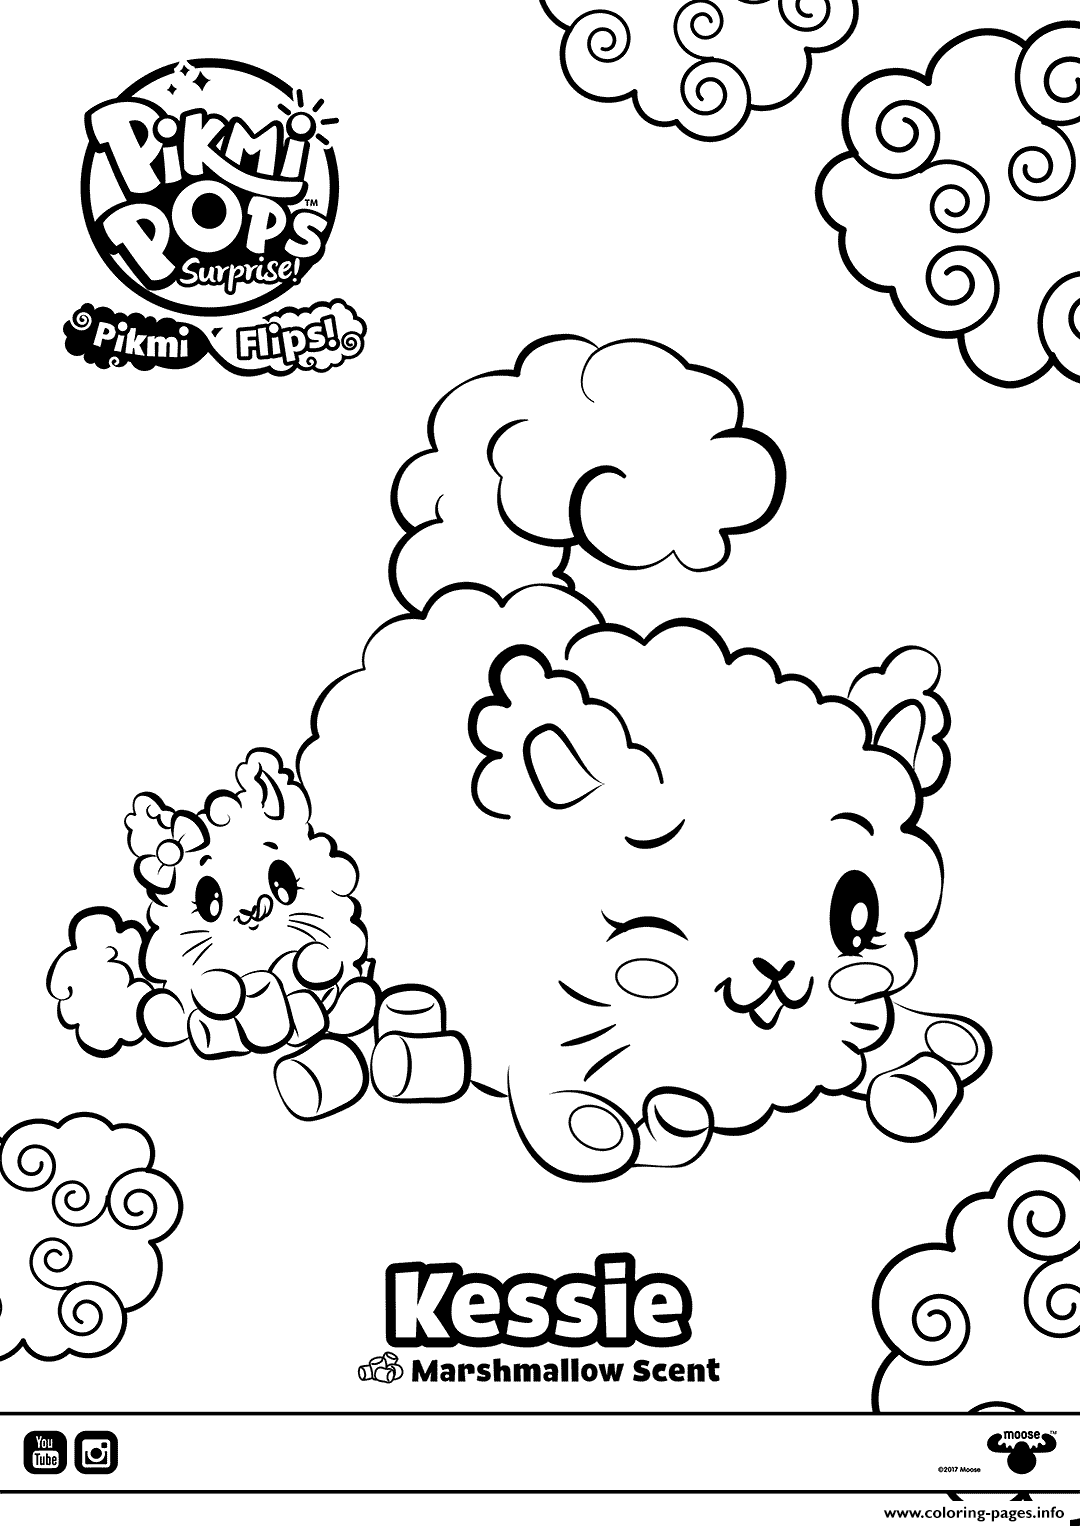 Pikmi Popss Kessie coloring pages